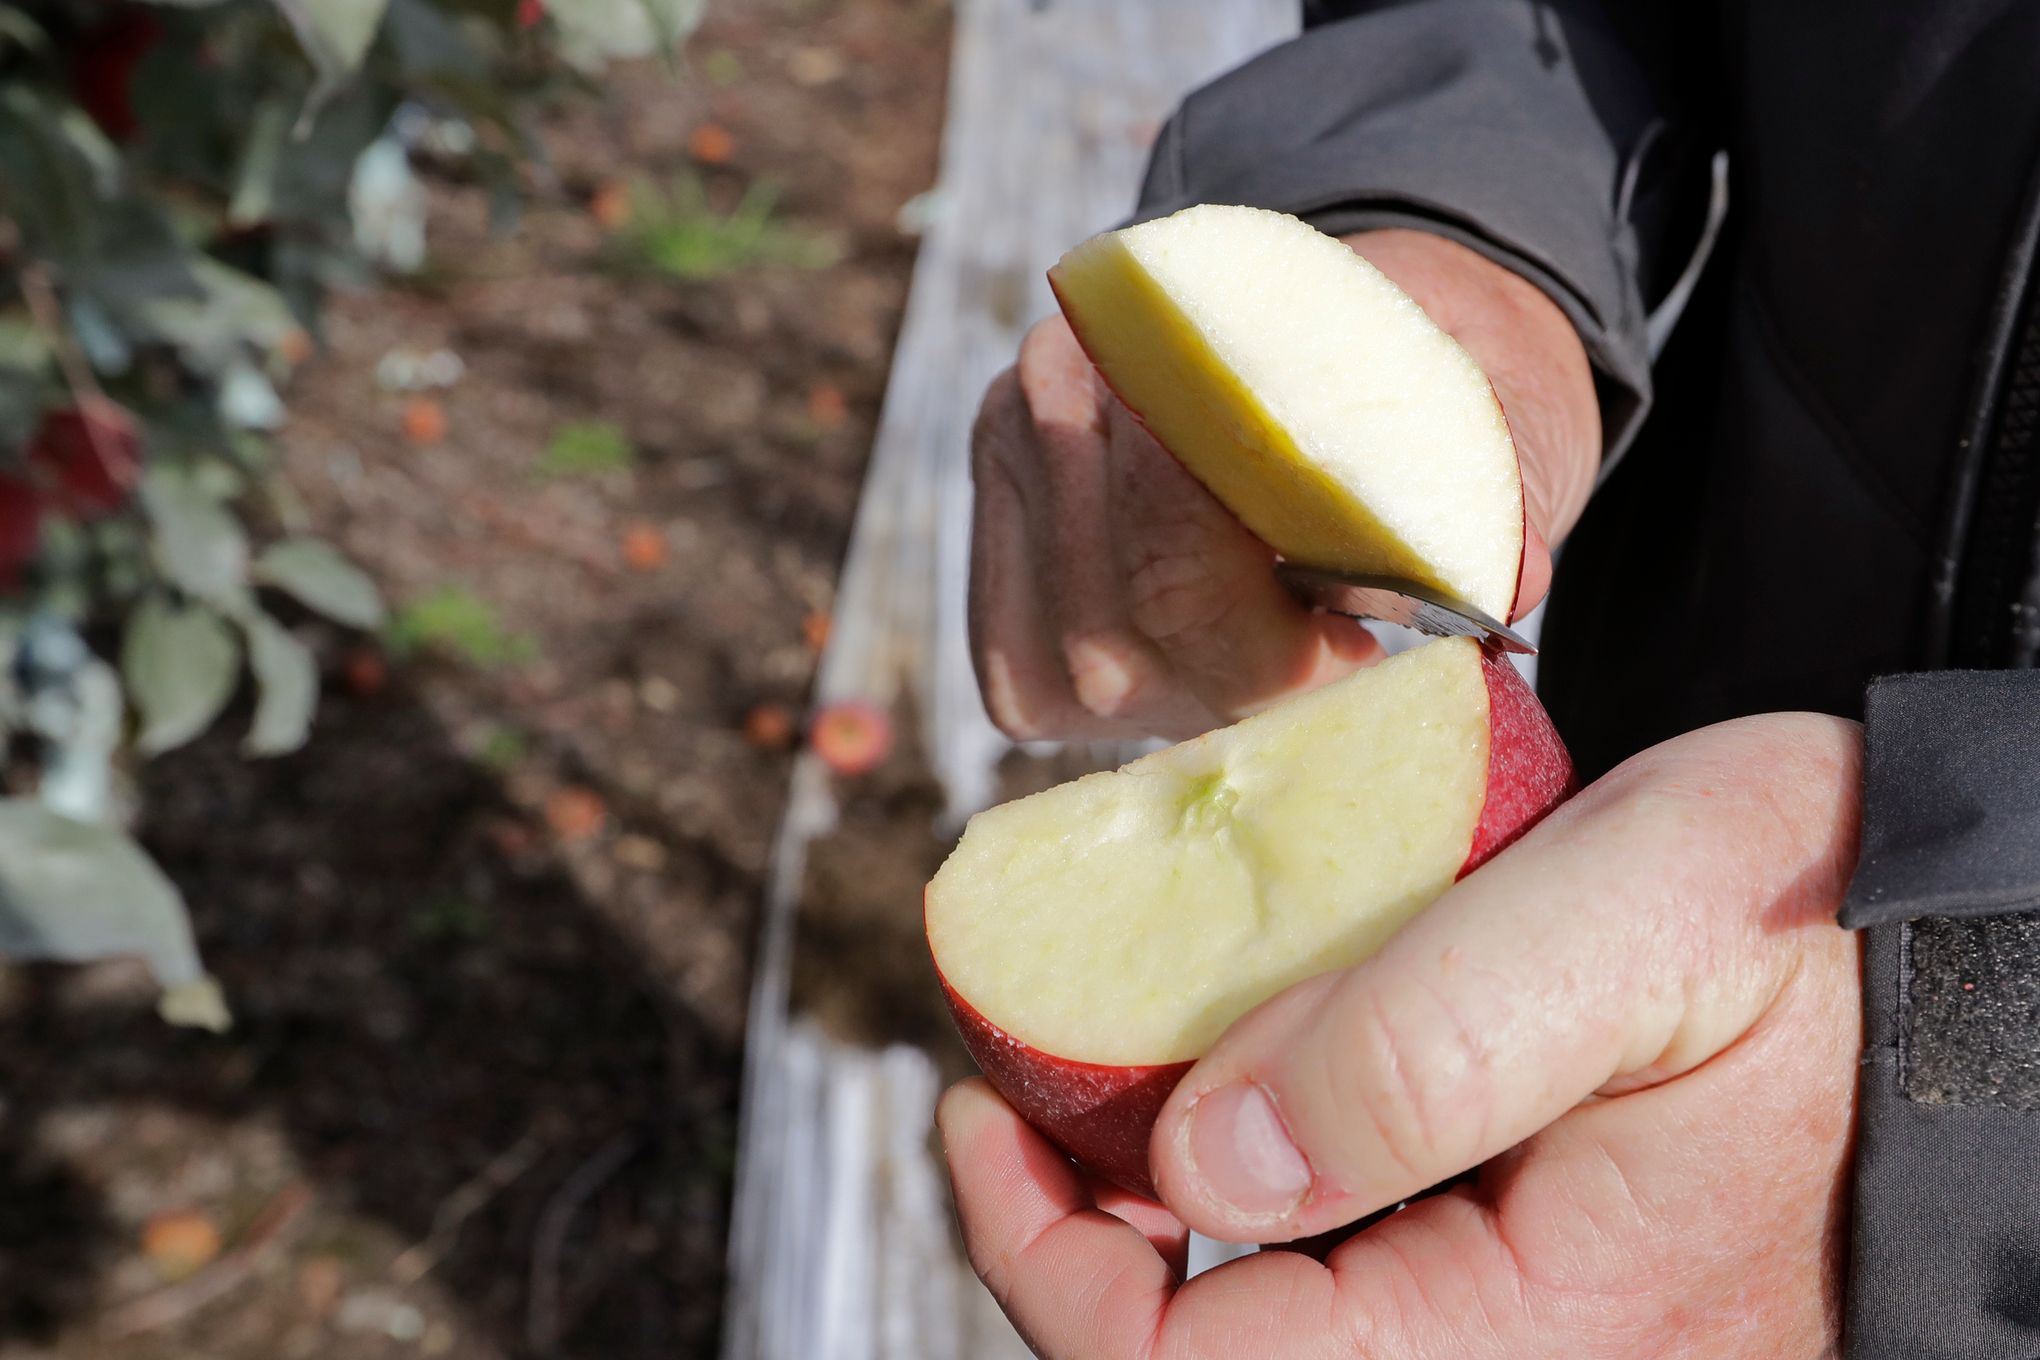 Opal apples are the non-browning apples you never knew you always needed